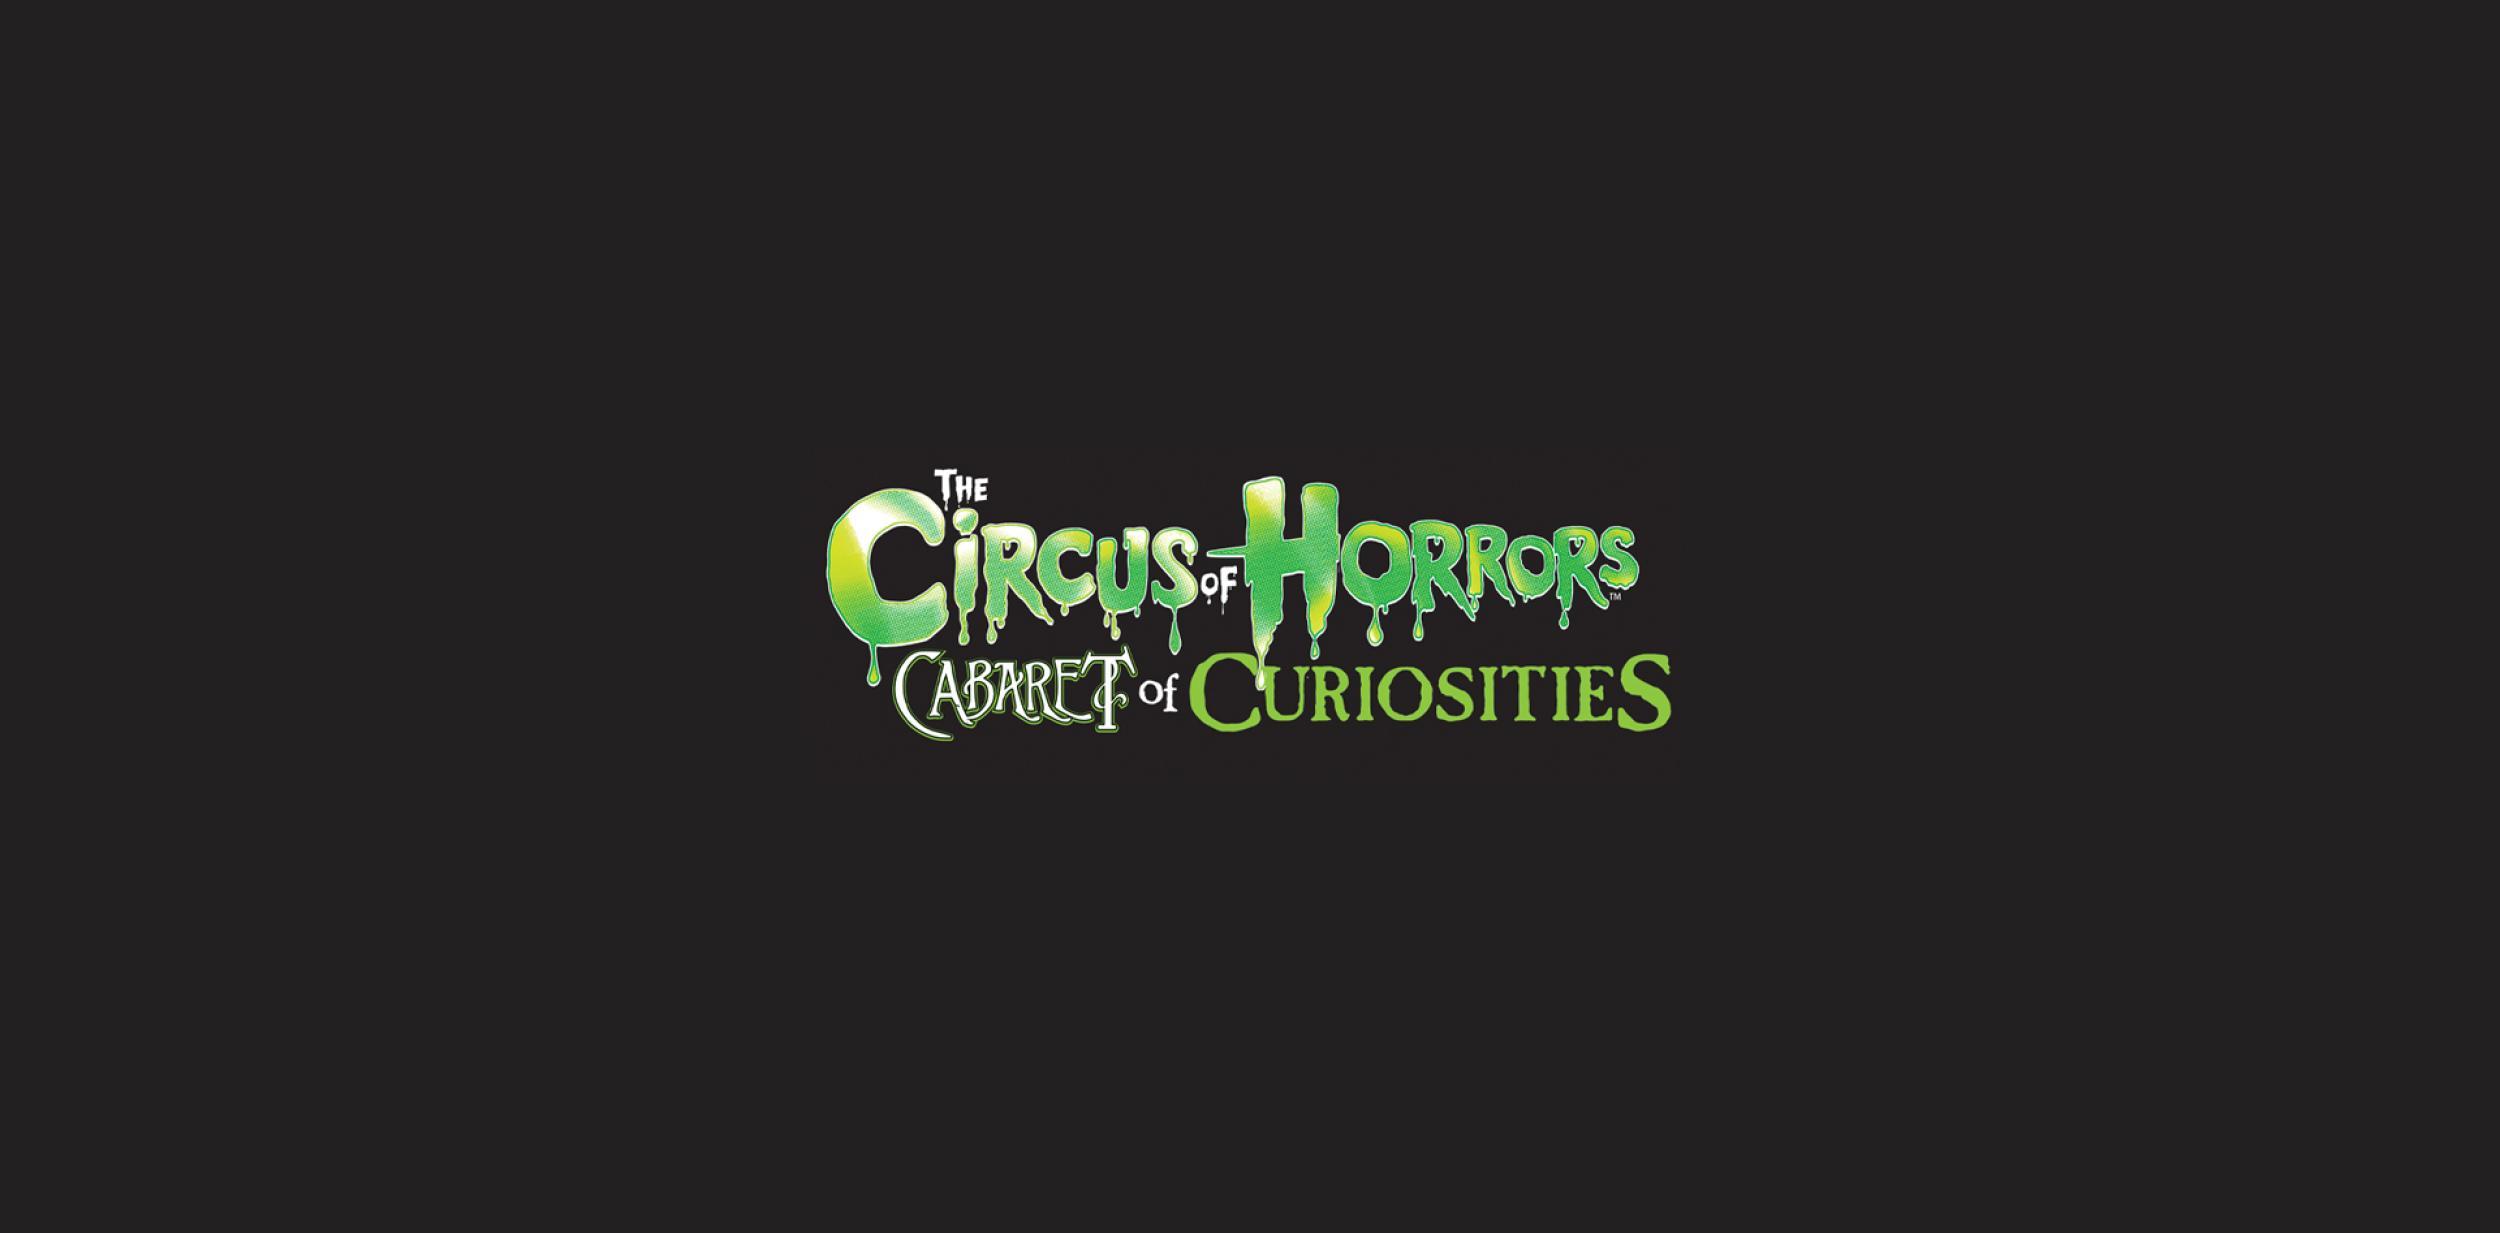 Black background with The Circus of Horrors Cabaret of  Curiosities title in green spooky font